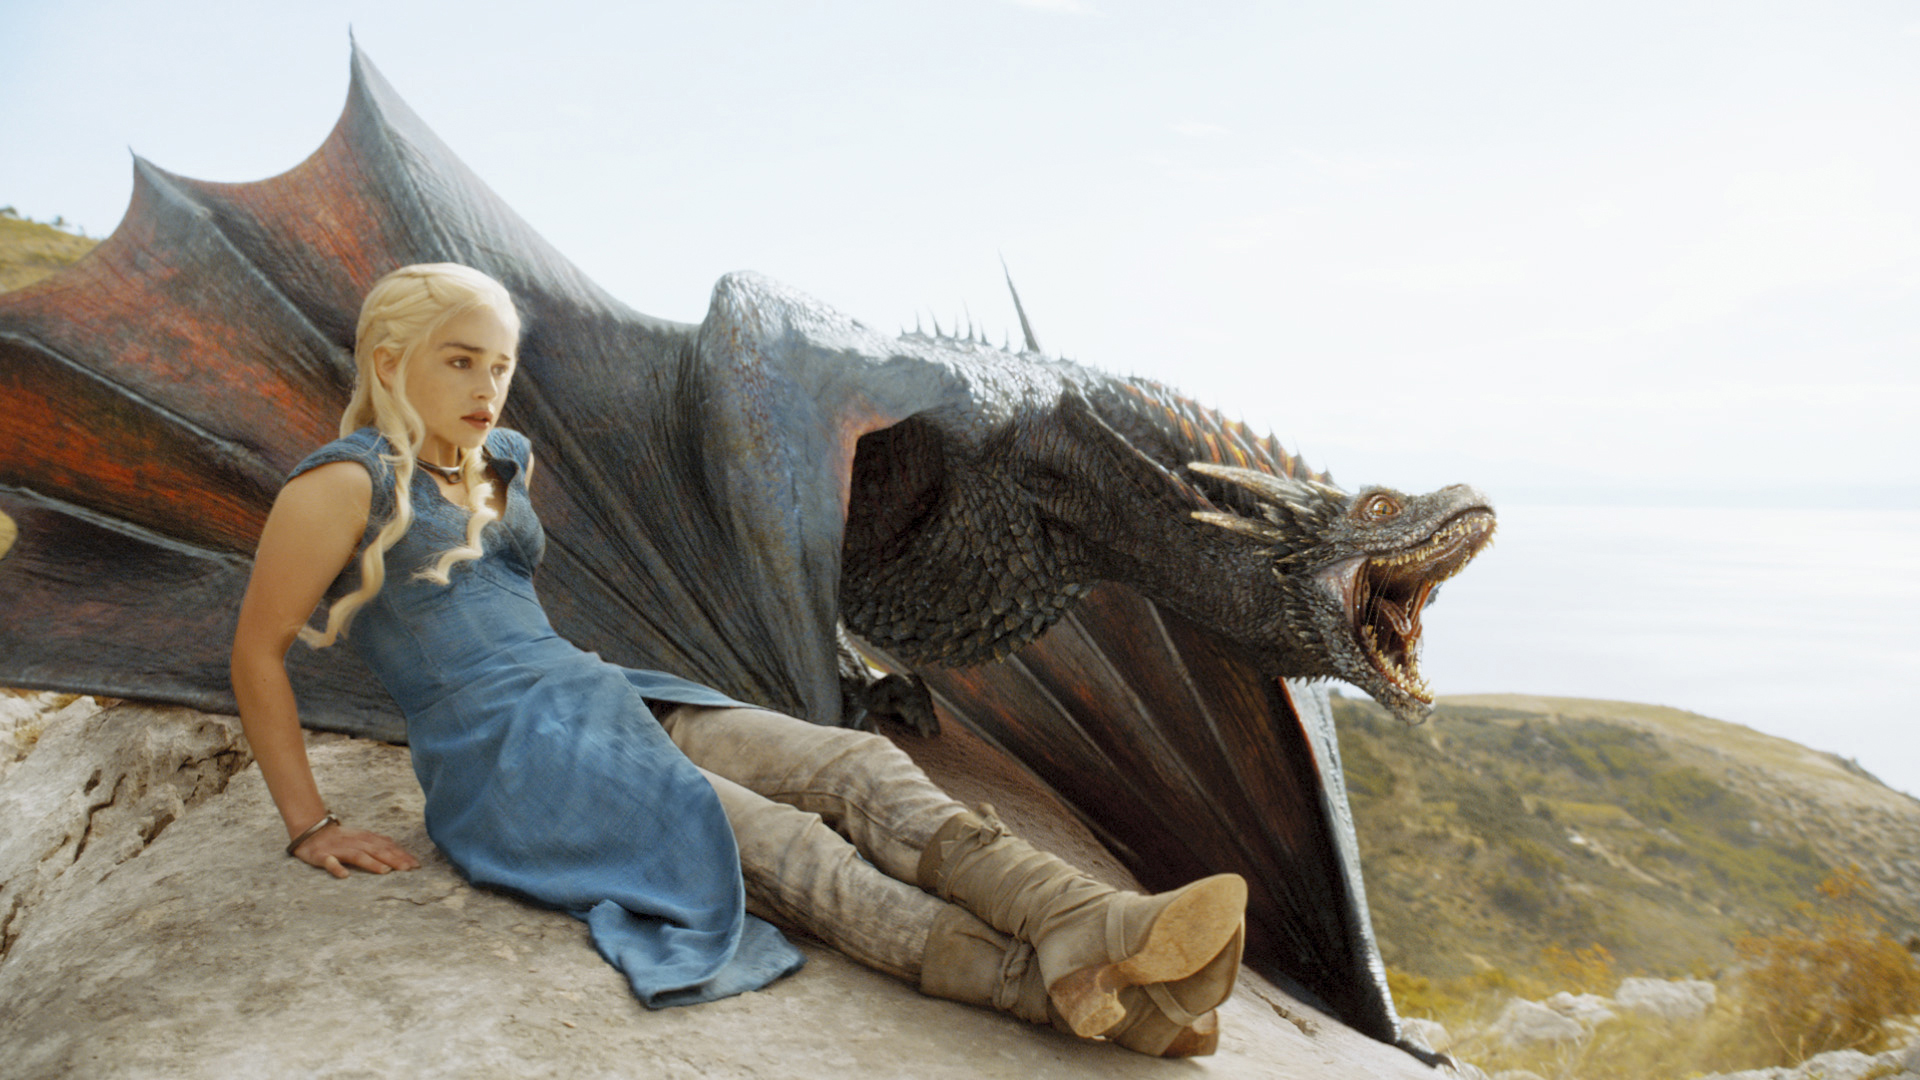 ⚔️ Only “Game of Thrones” Experts Can Pass This Season 7 Quiz. Can You? Daenerys